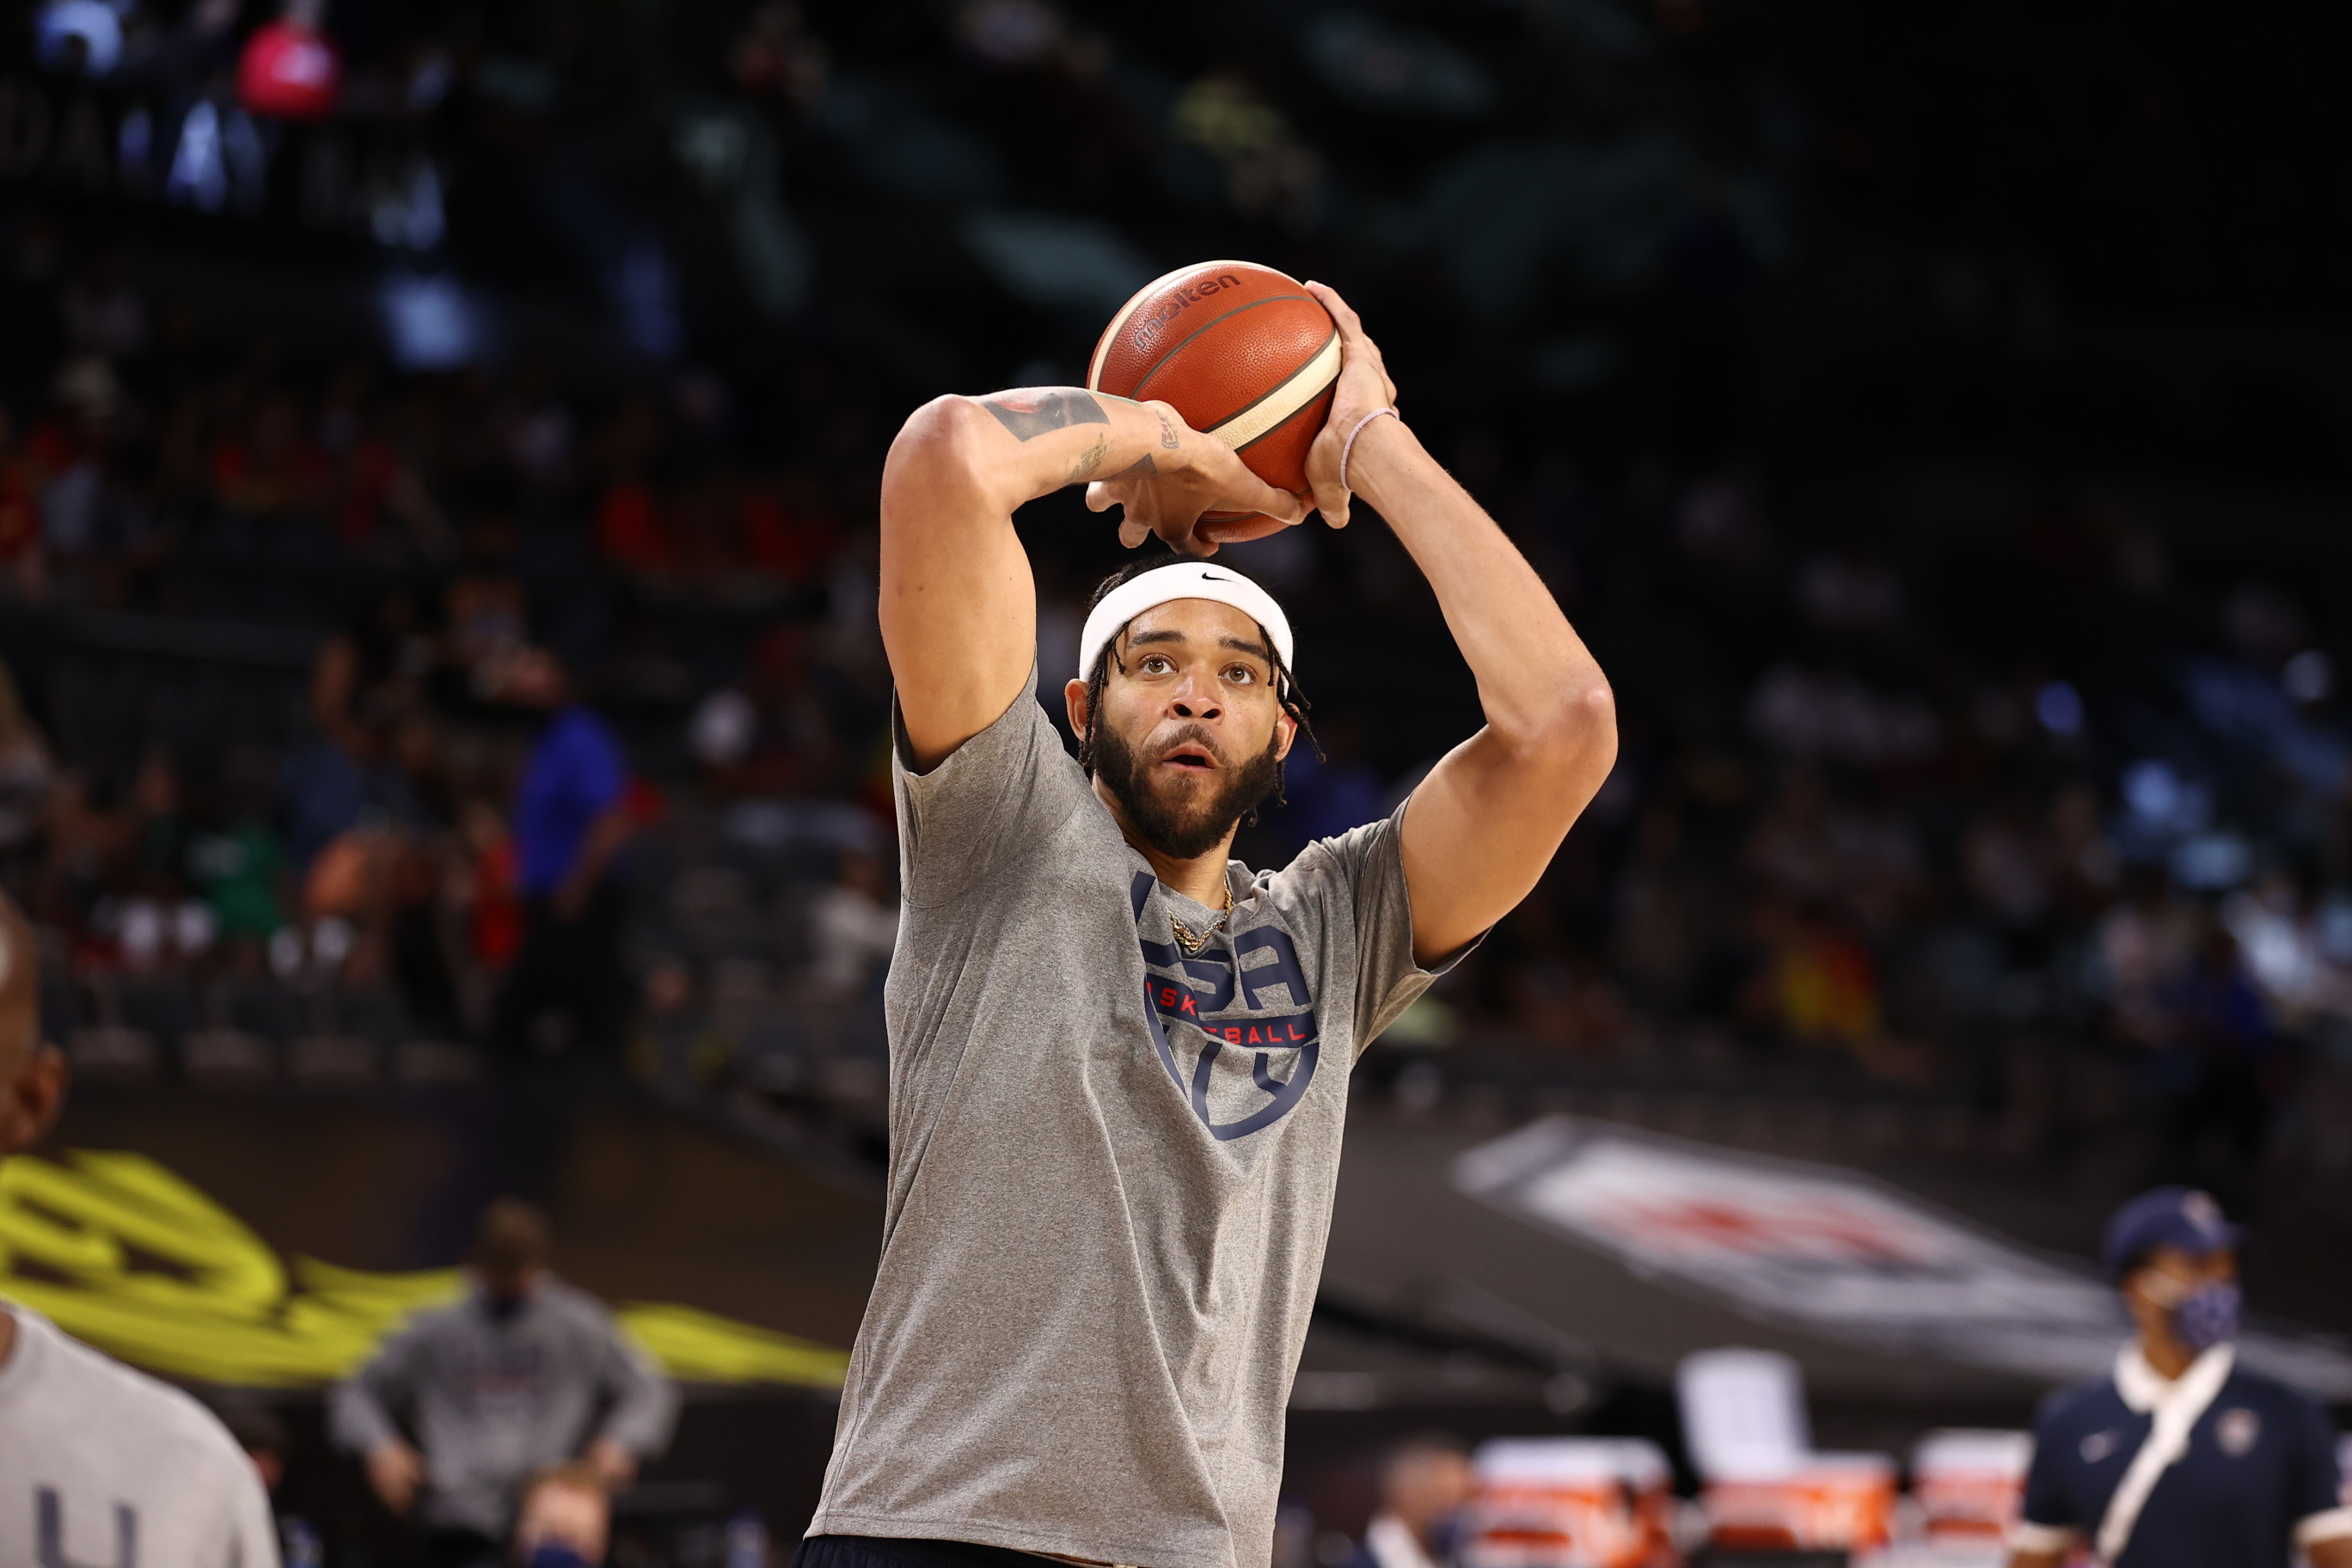 Suns center JaVale McGee to return from injury Sunday vs. Spurs